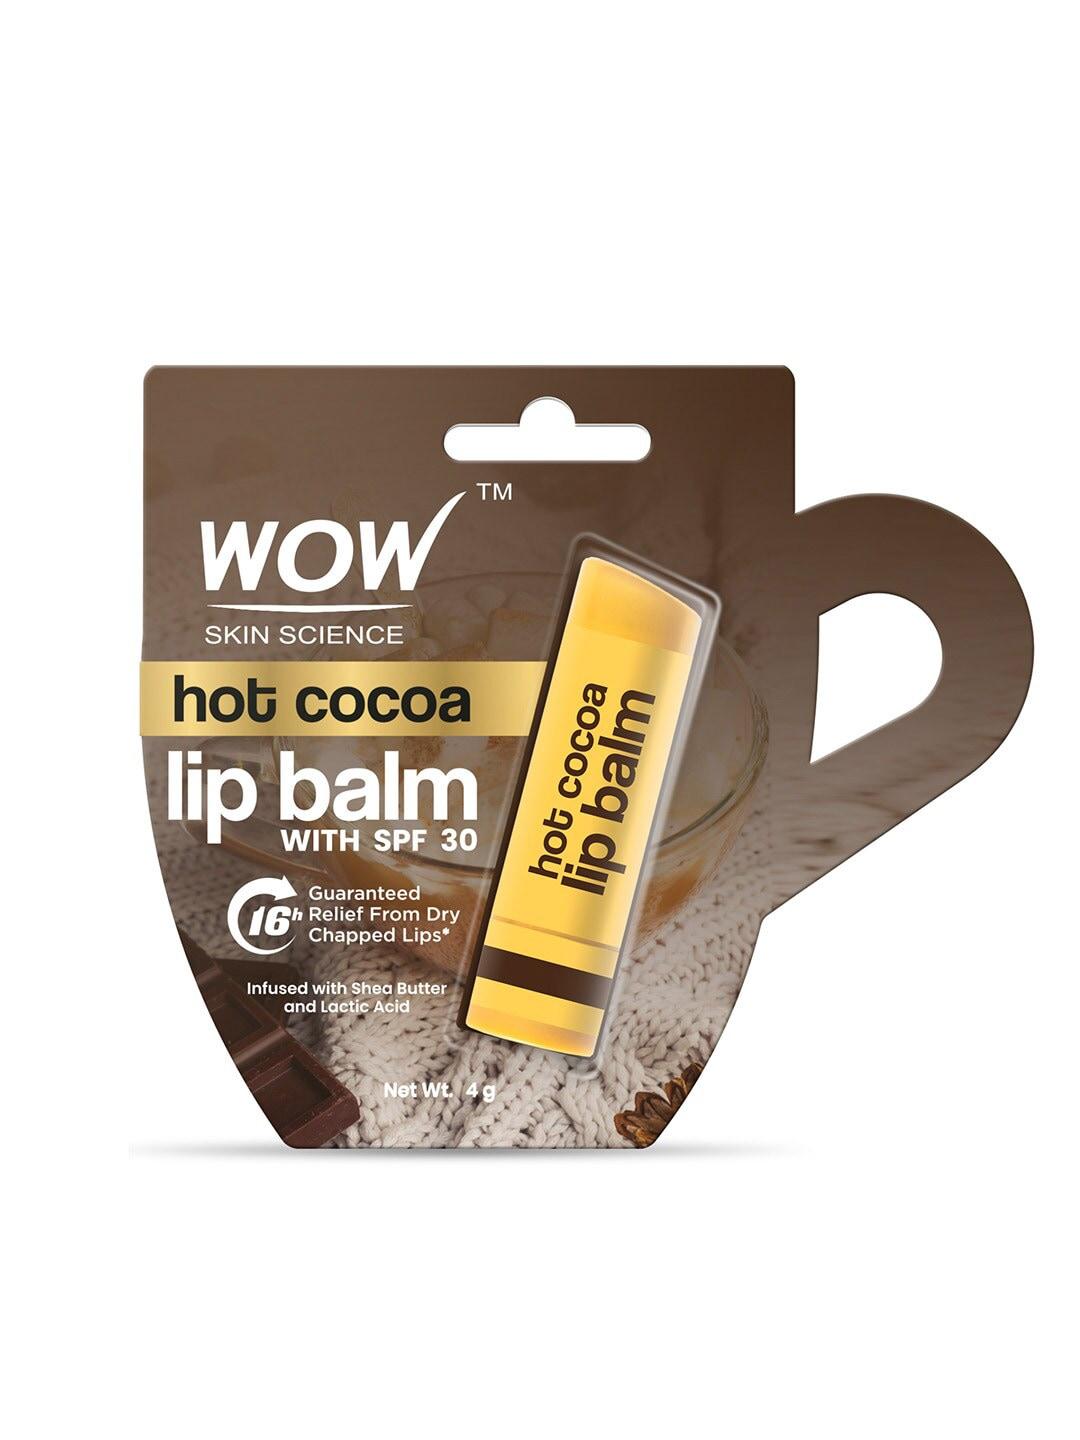 wow skin science hot cocoa lip balm with shea butter & lactic acid 4 g - brown